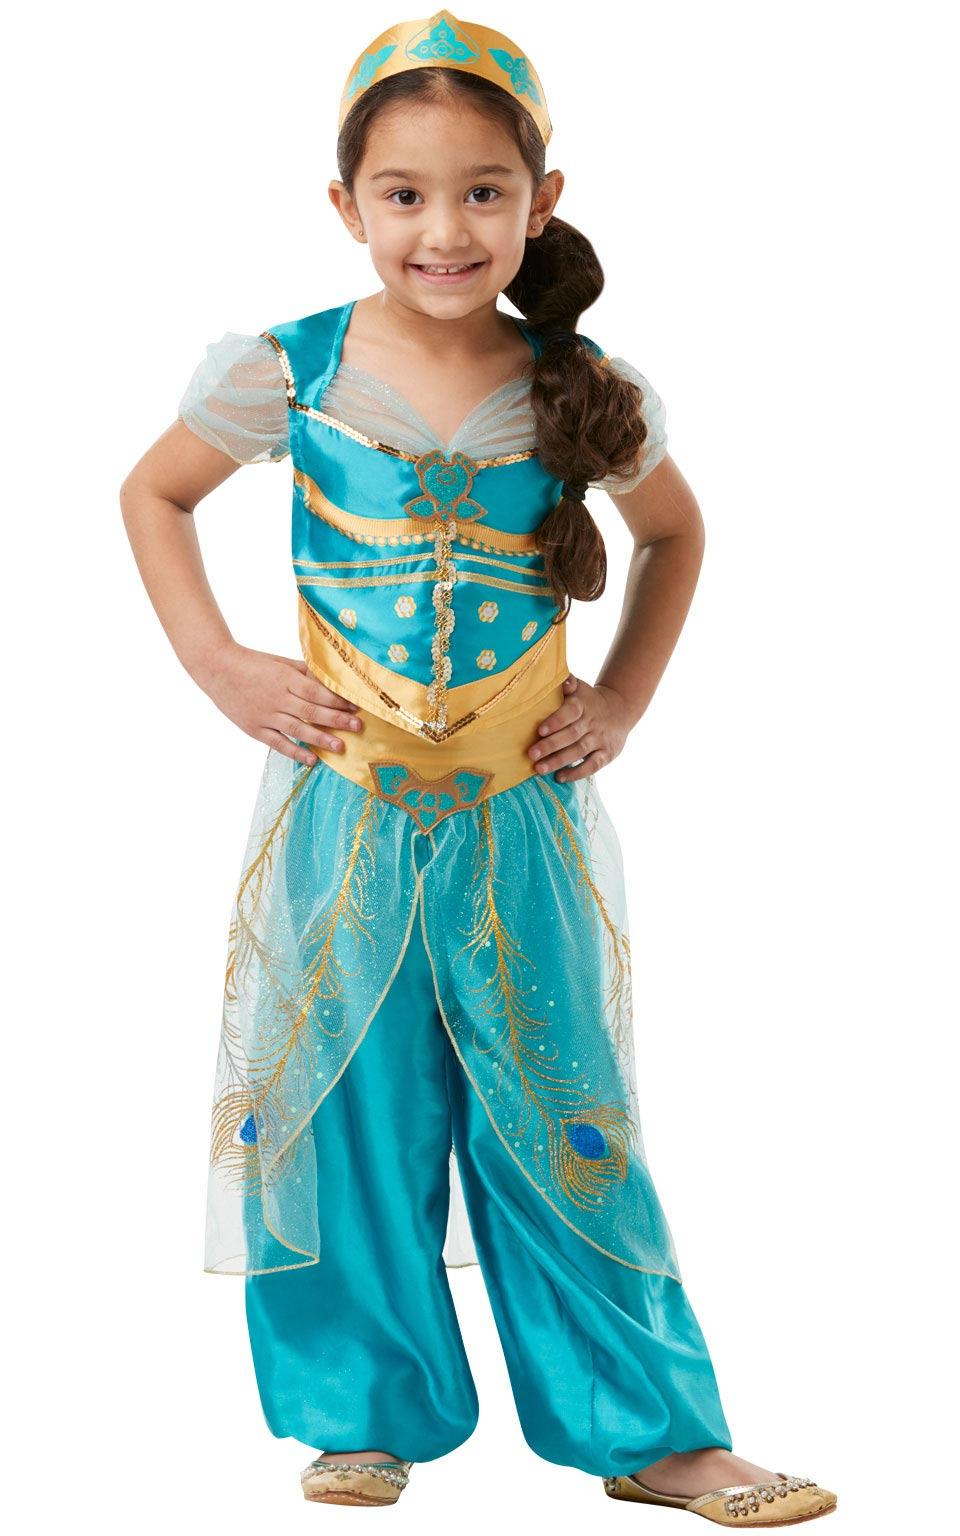 Disney's Jasmine Fancy Dress Costume from Aladdin by Rubies 300297 and 300302 available here at Karnival Costumes online party shop